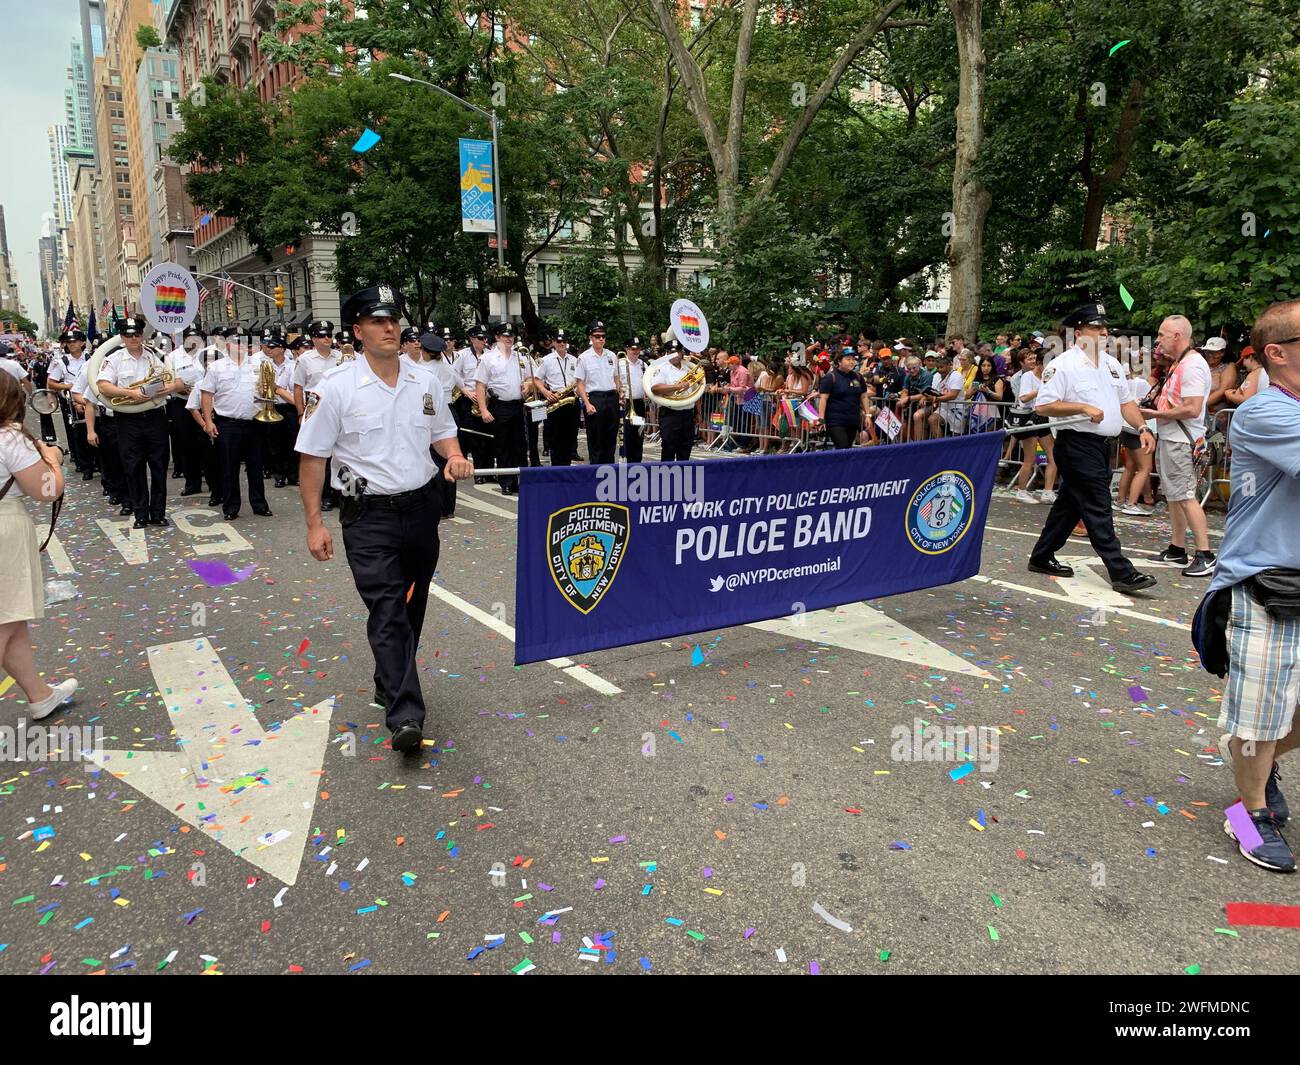 The NYPD shows their support for the LBGT community with their marching band participating in the Gay Pride Parade Stock Photo